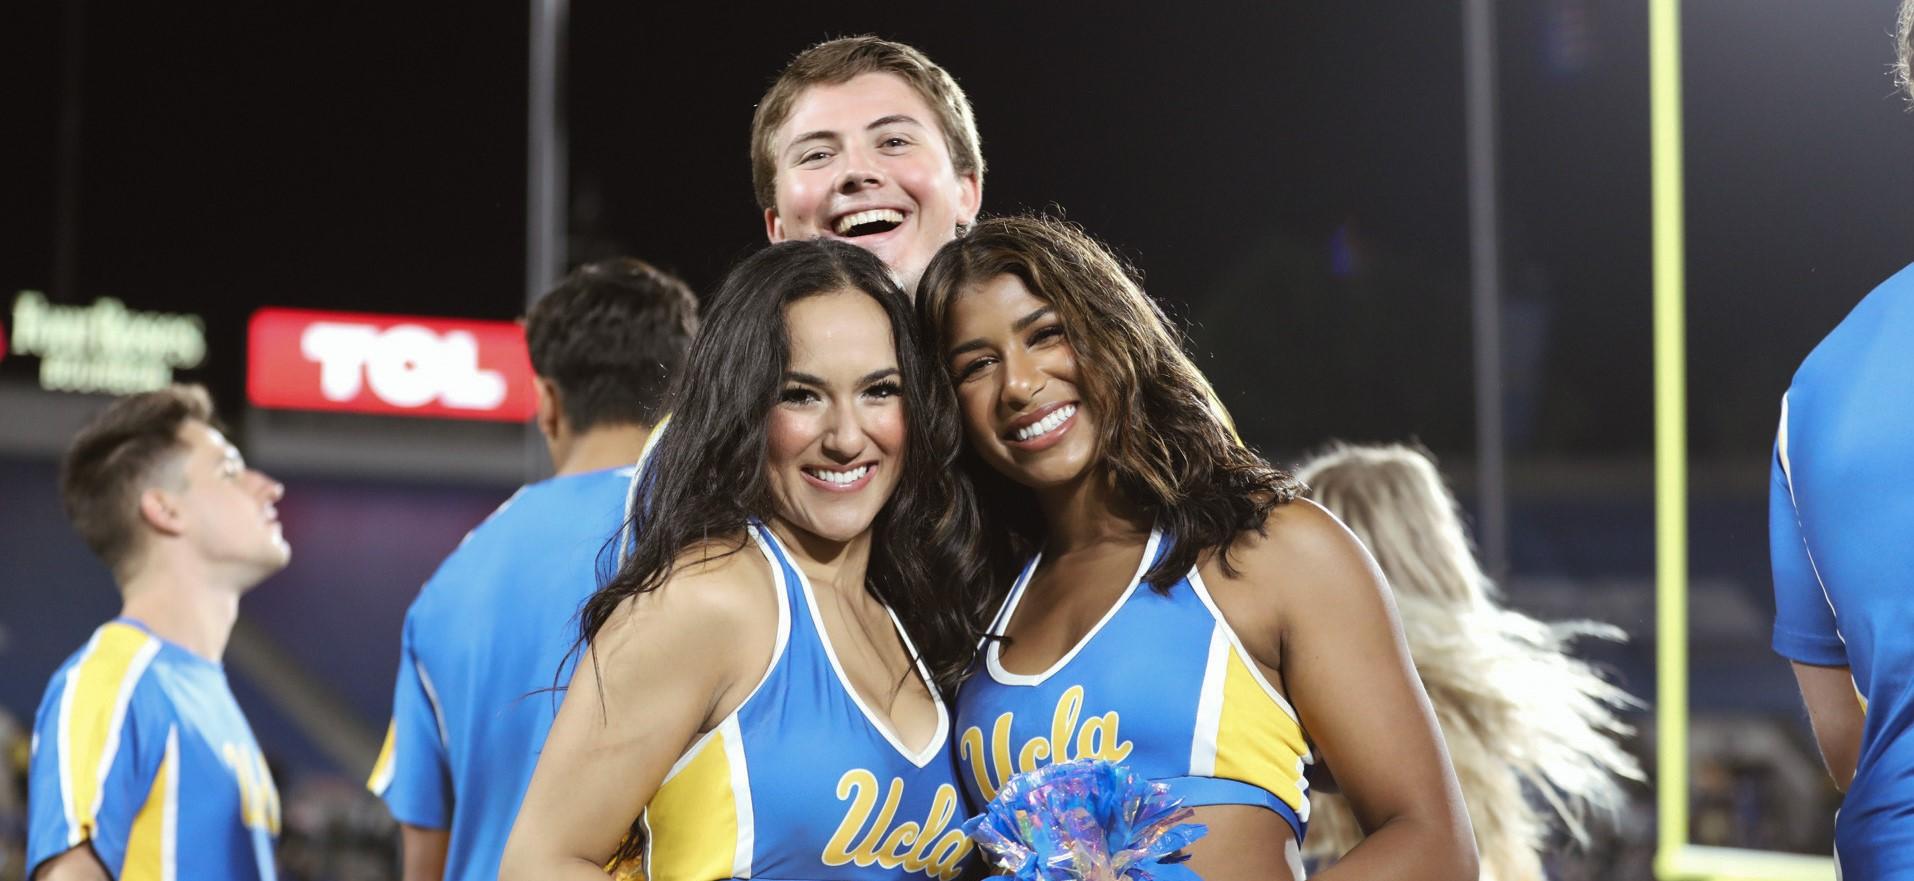 Members of the UCLA Cheer Squad